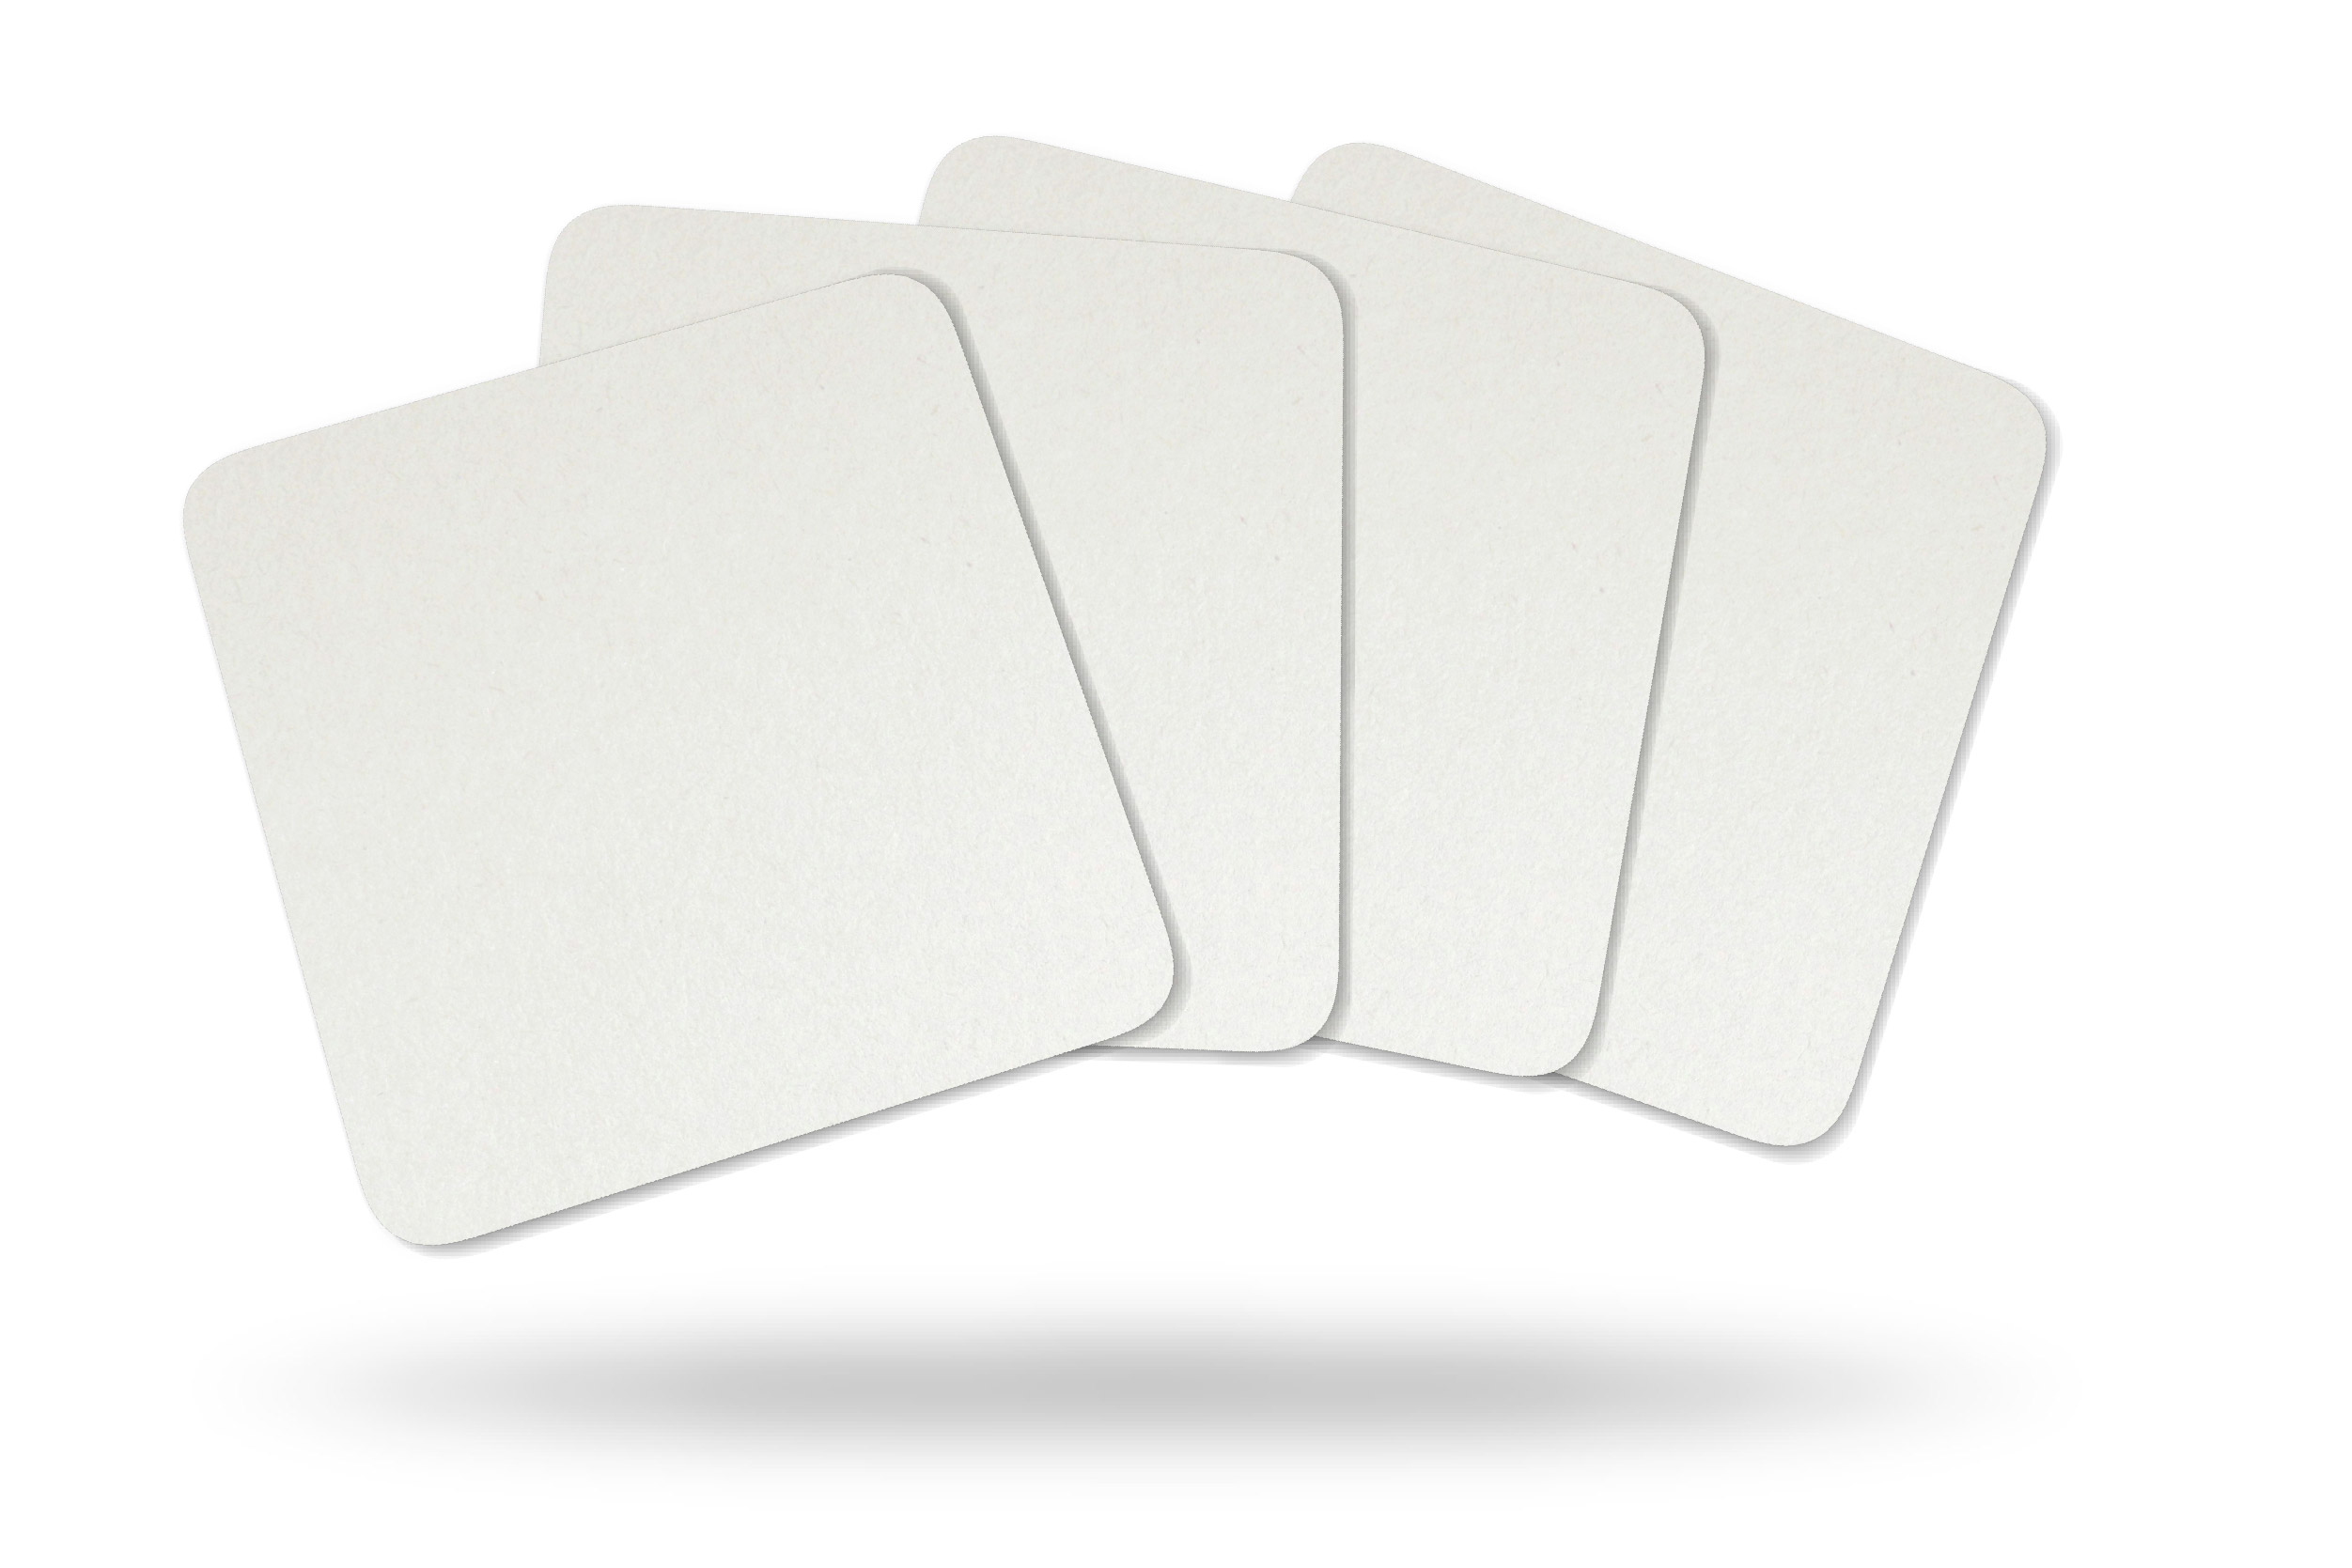 Blank 4 Inch Square 80pt Pulpboard Coasters